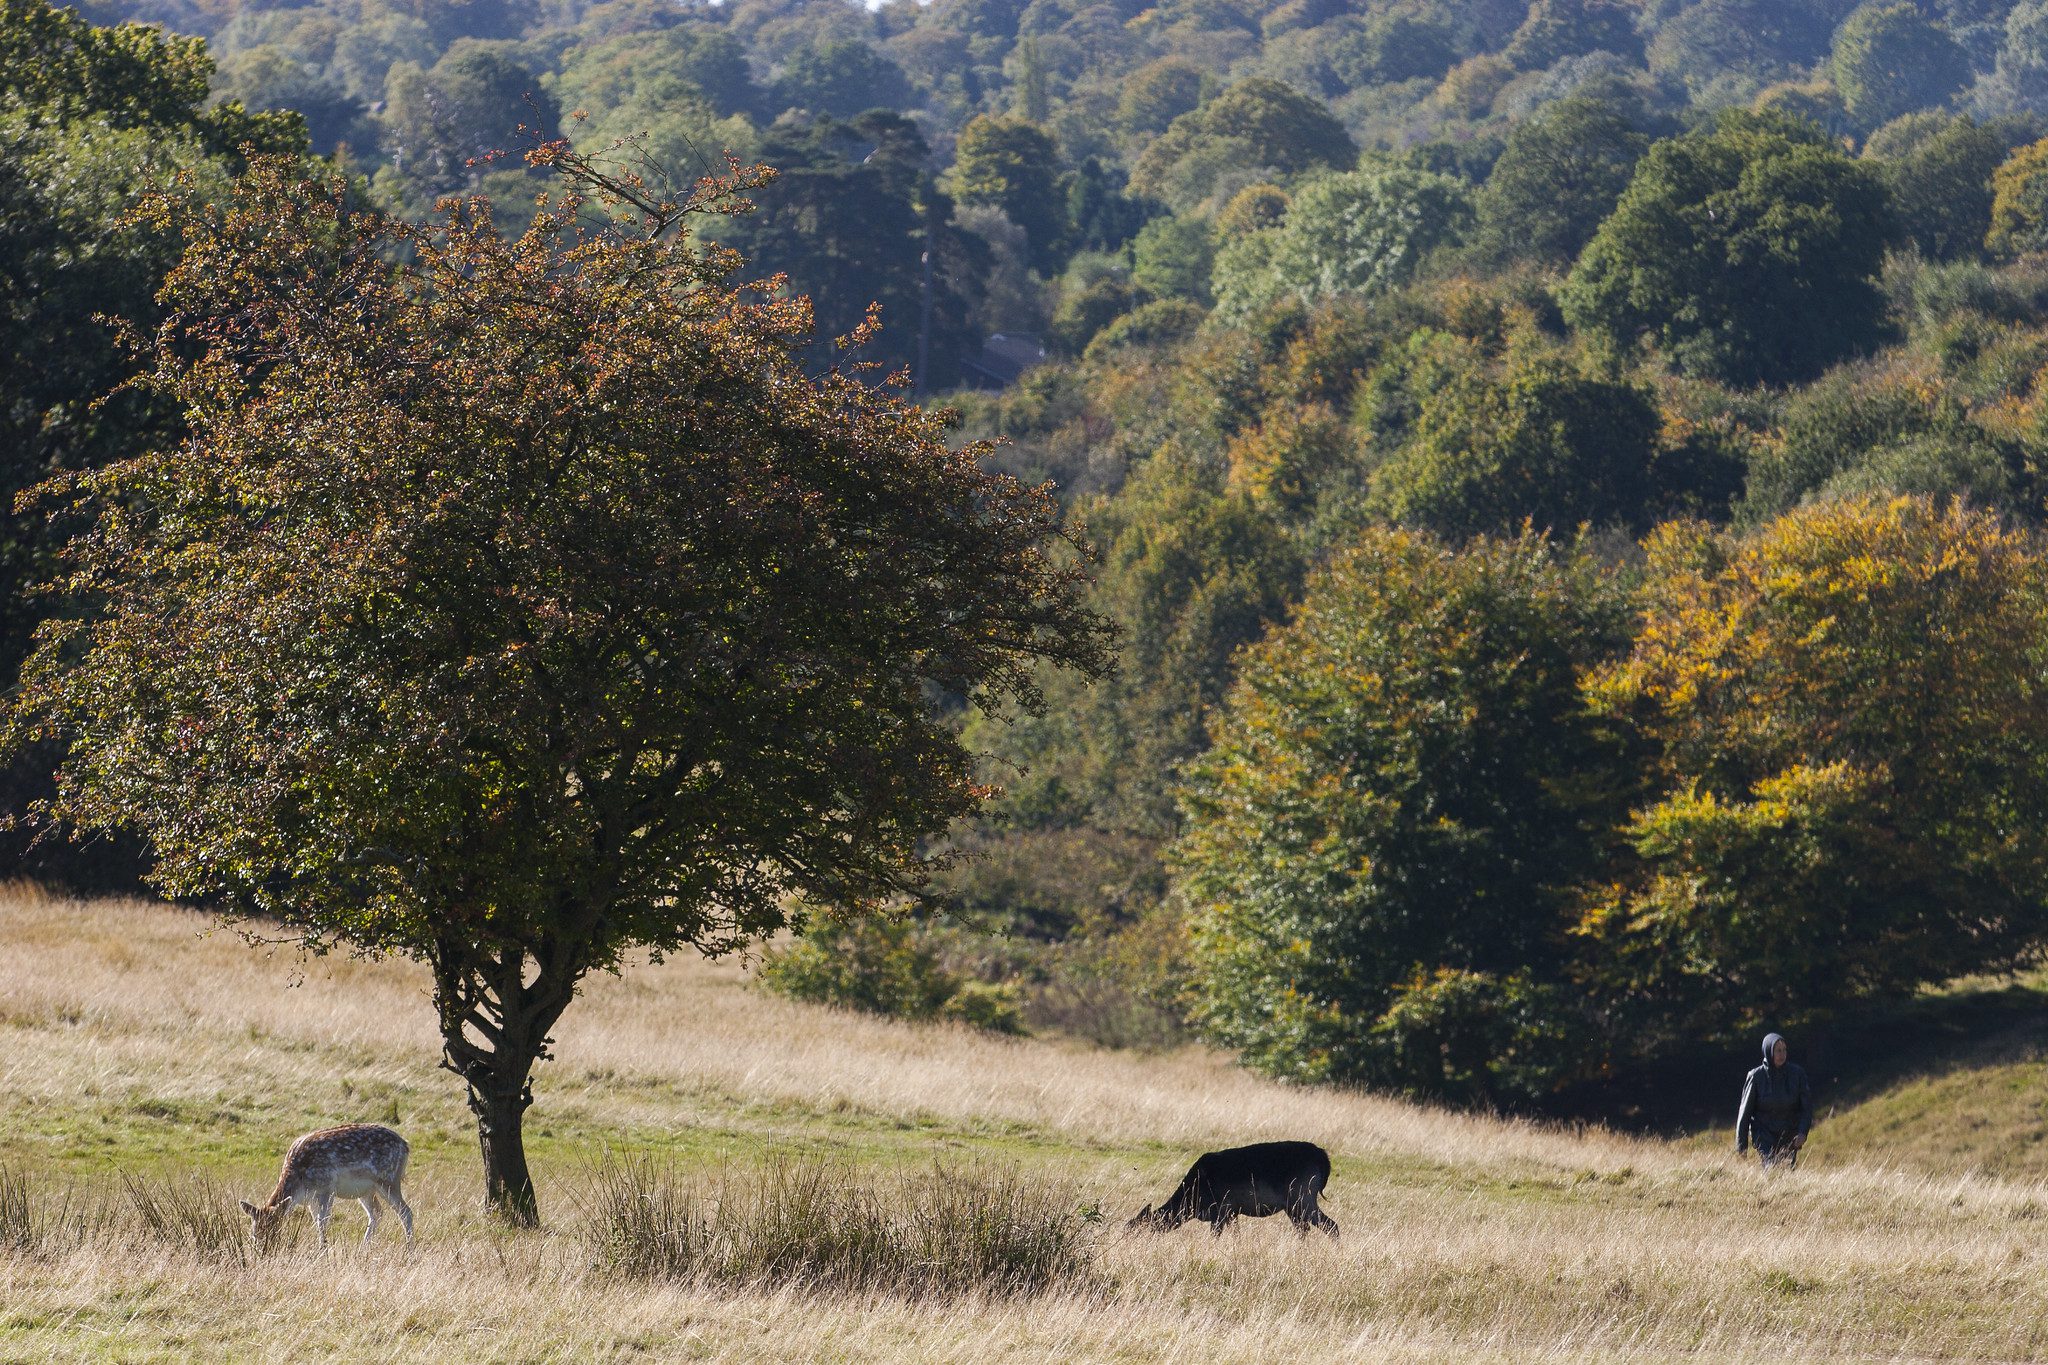 Deer grazing in Knole Park, with one person walking through the long grass fields. Woodland in distance, with green and yellow leaves.